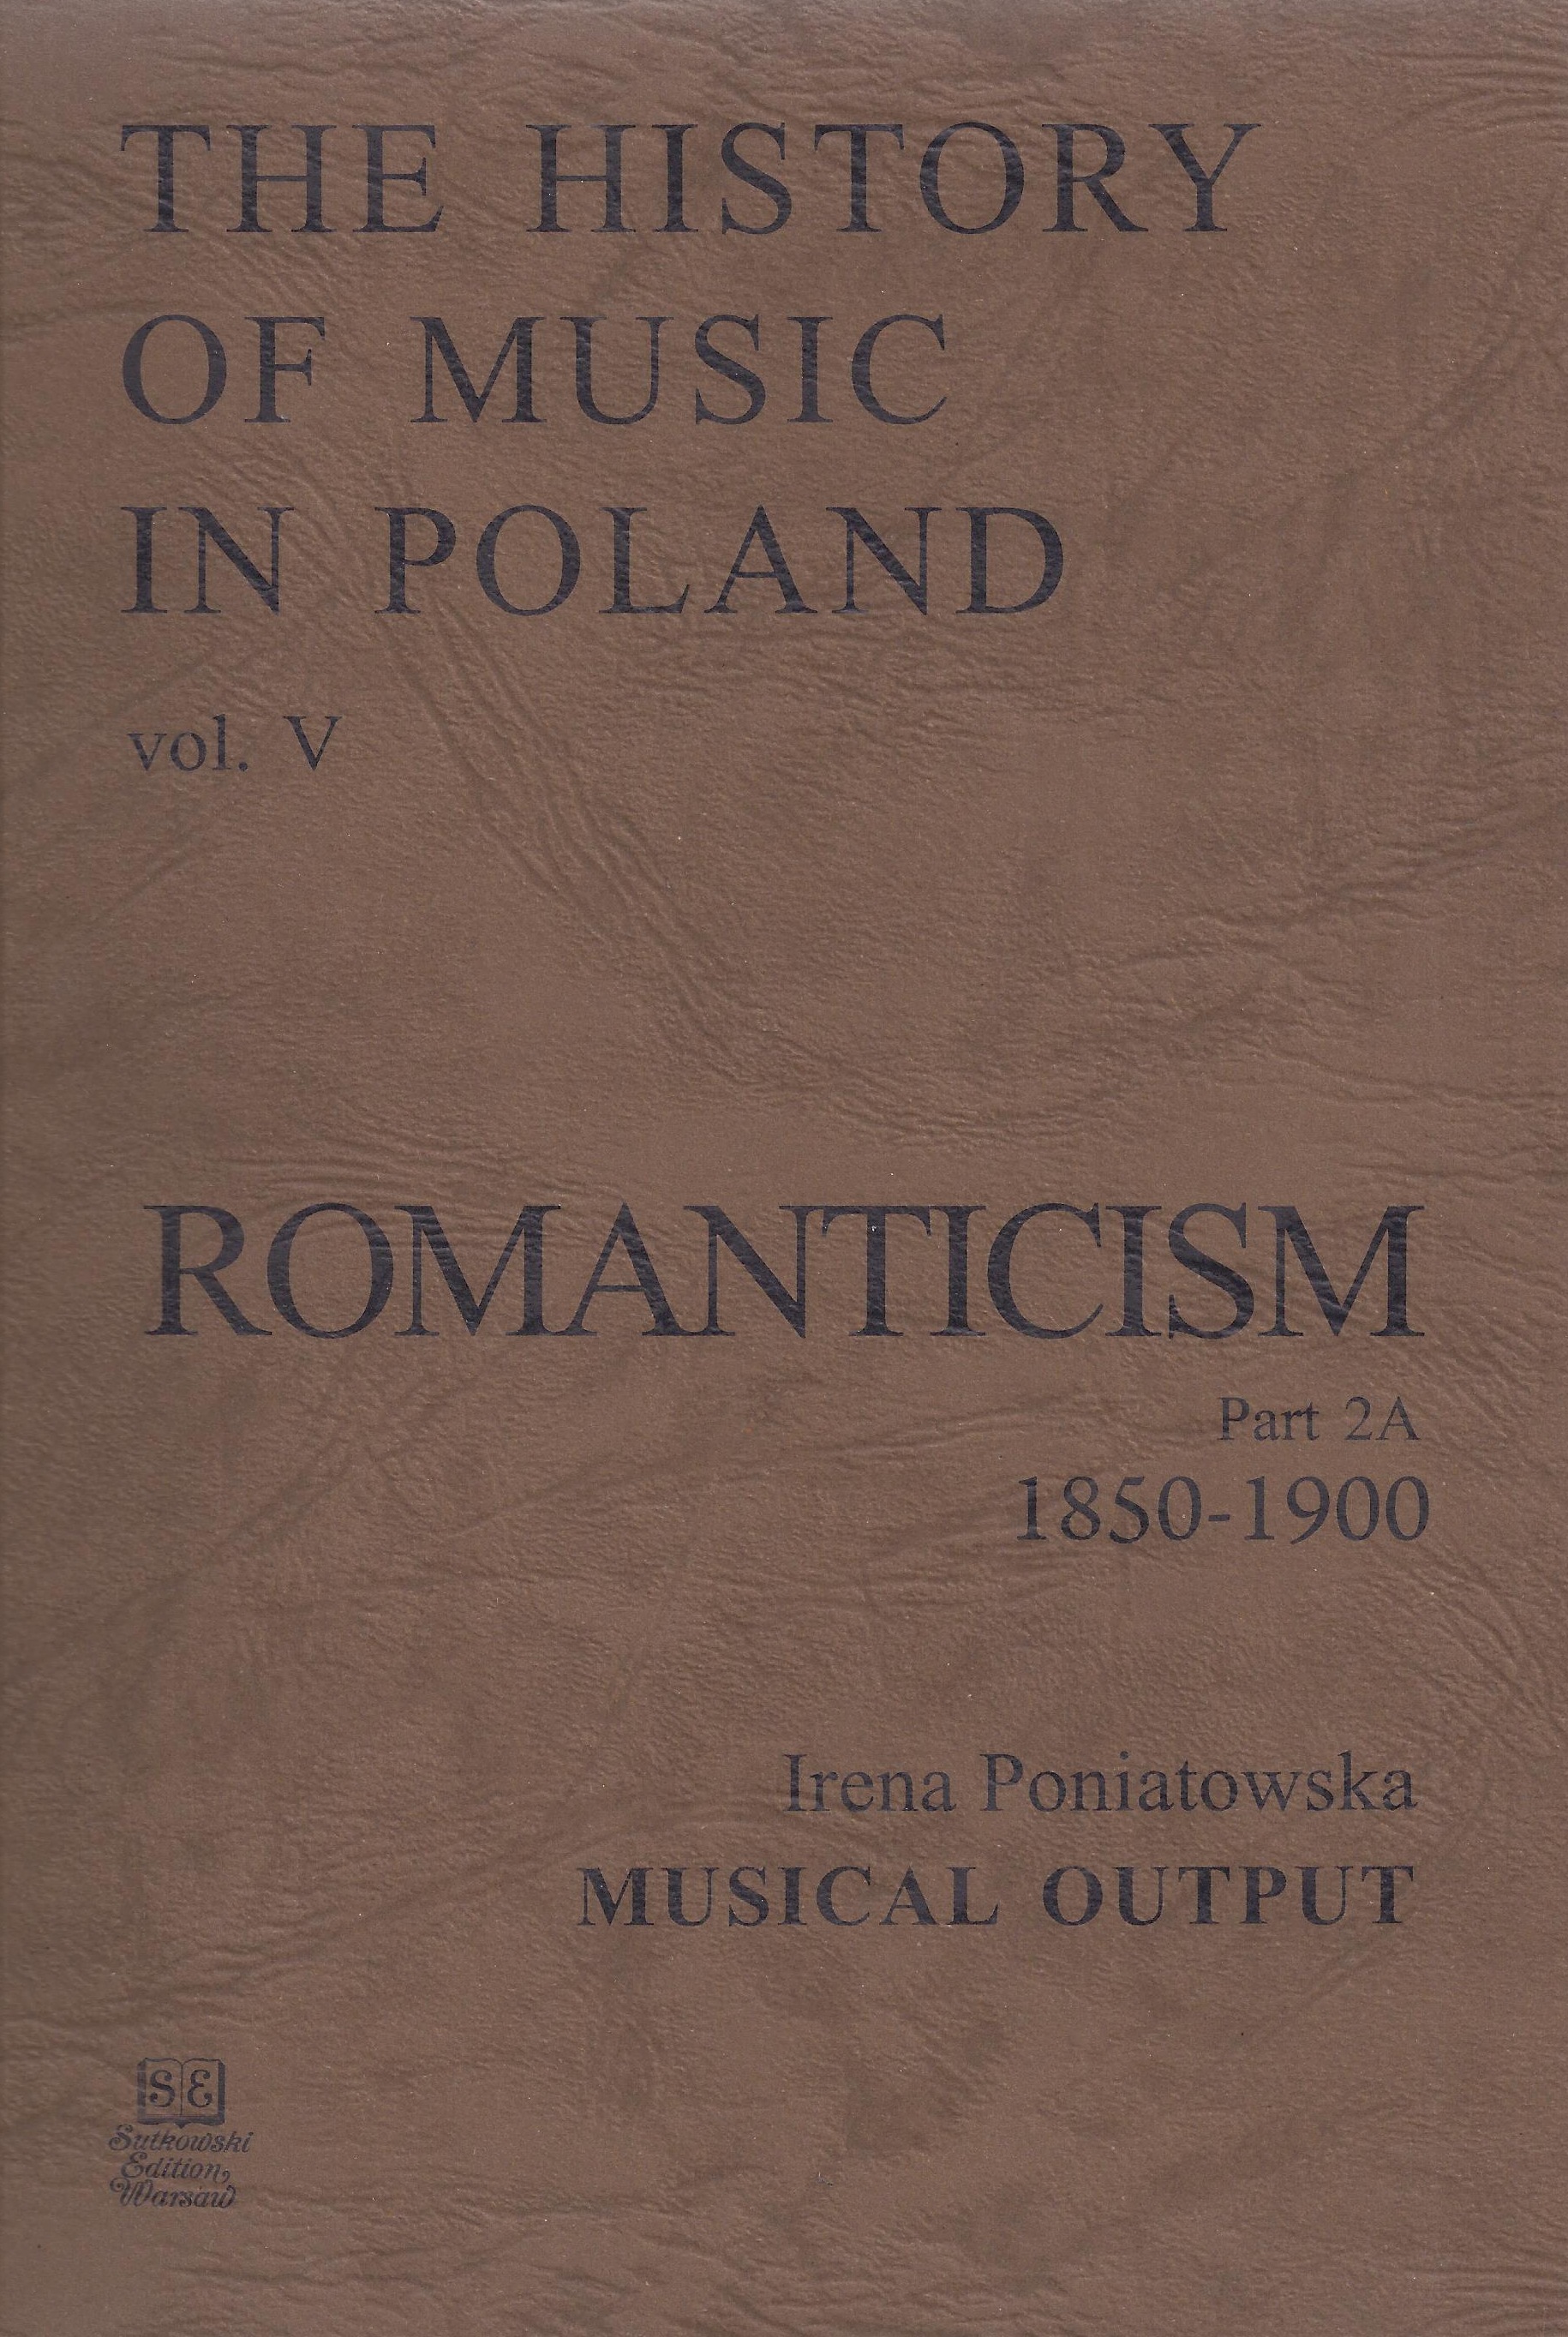 The History of Music in Poland vol V Part.2A – Romanticism (1850-1900)